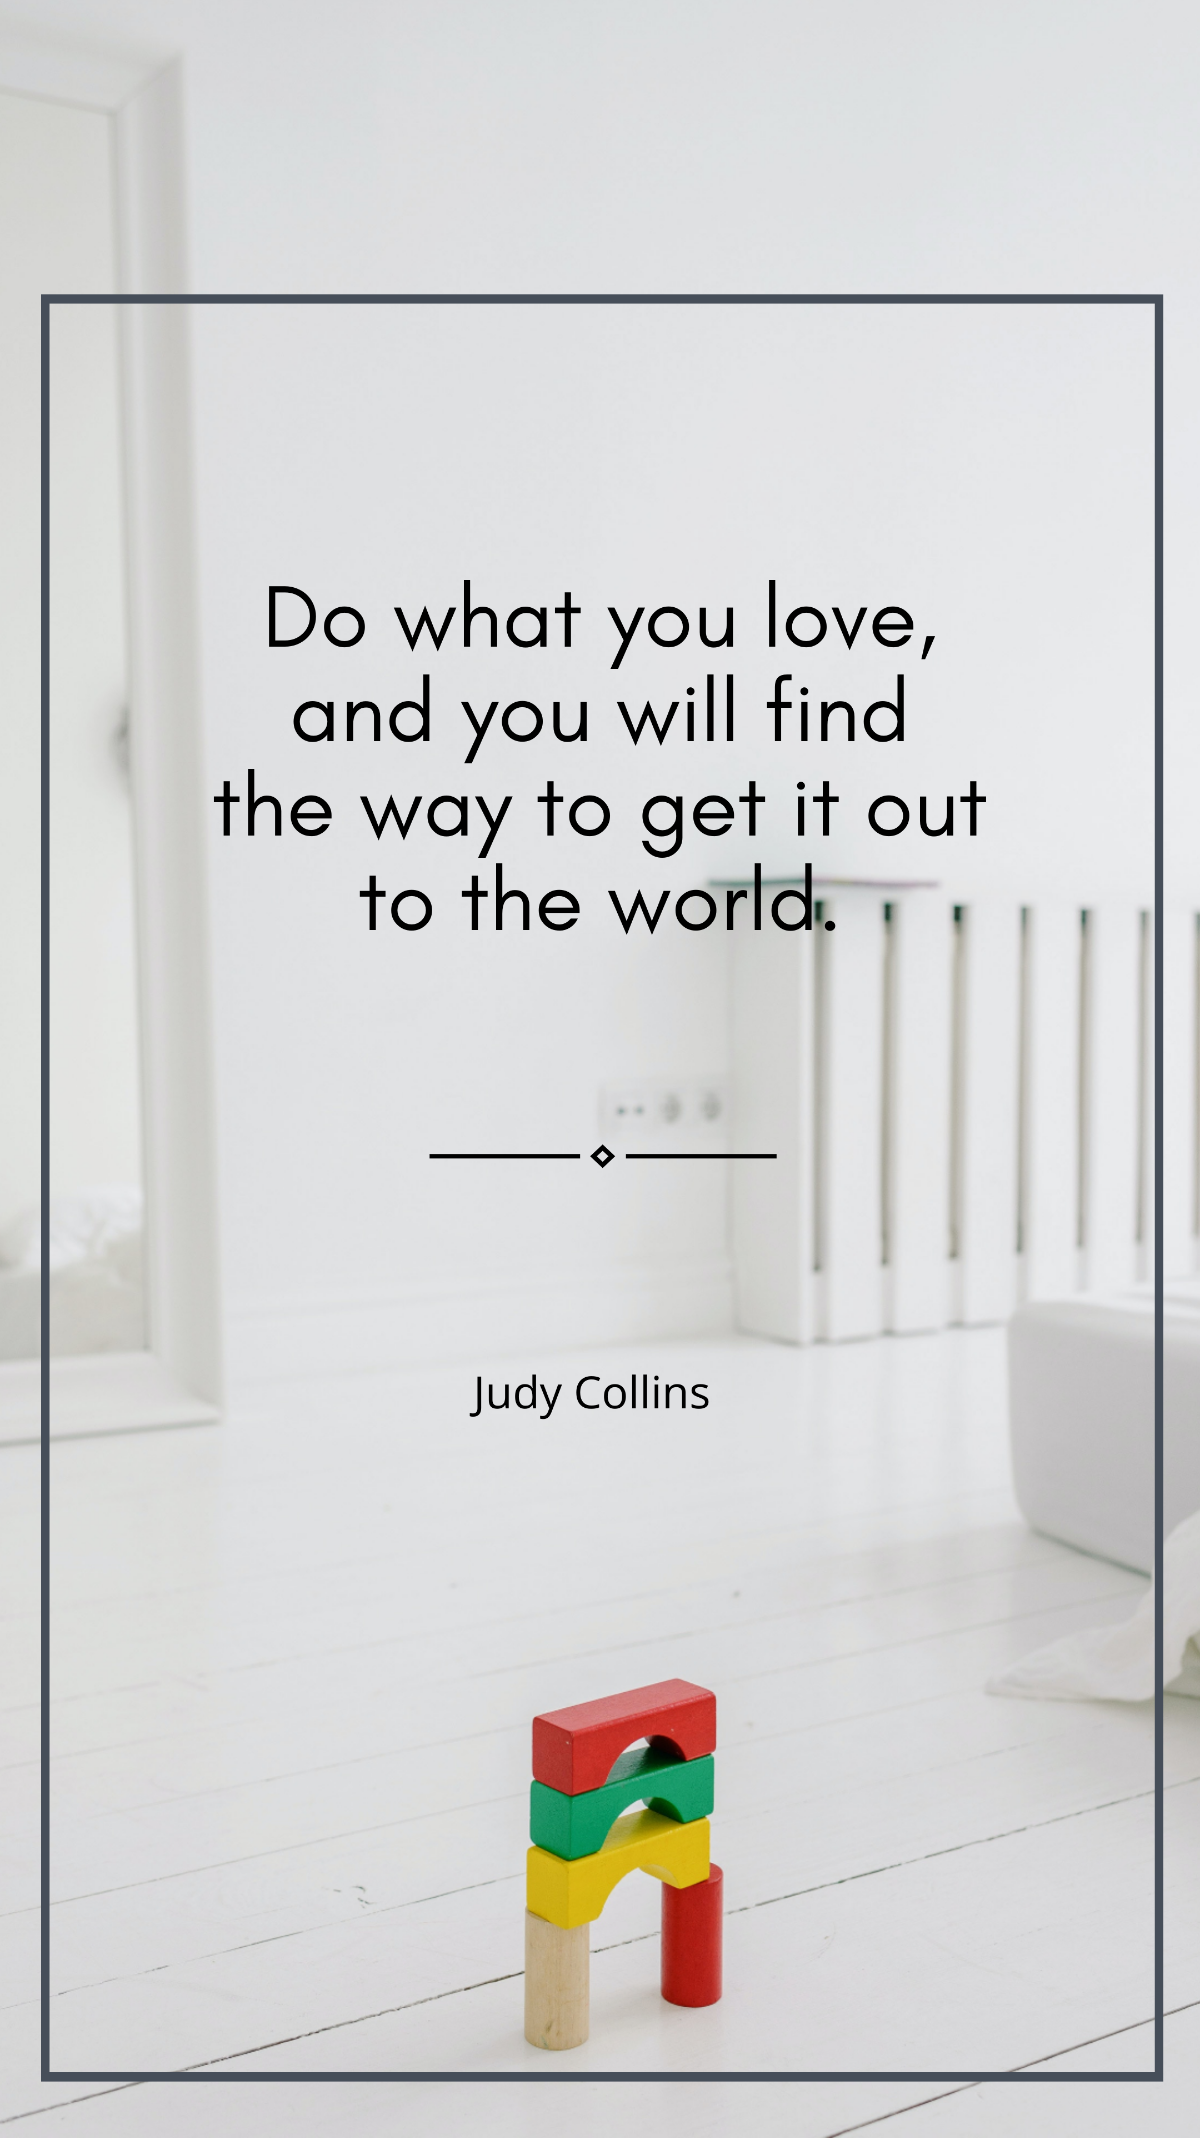 Judy Collins - “Do what you love, and you will find the way to get it out to the world.”